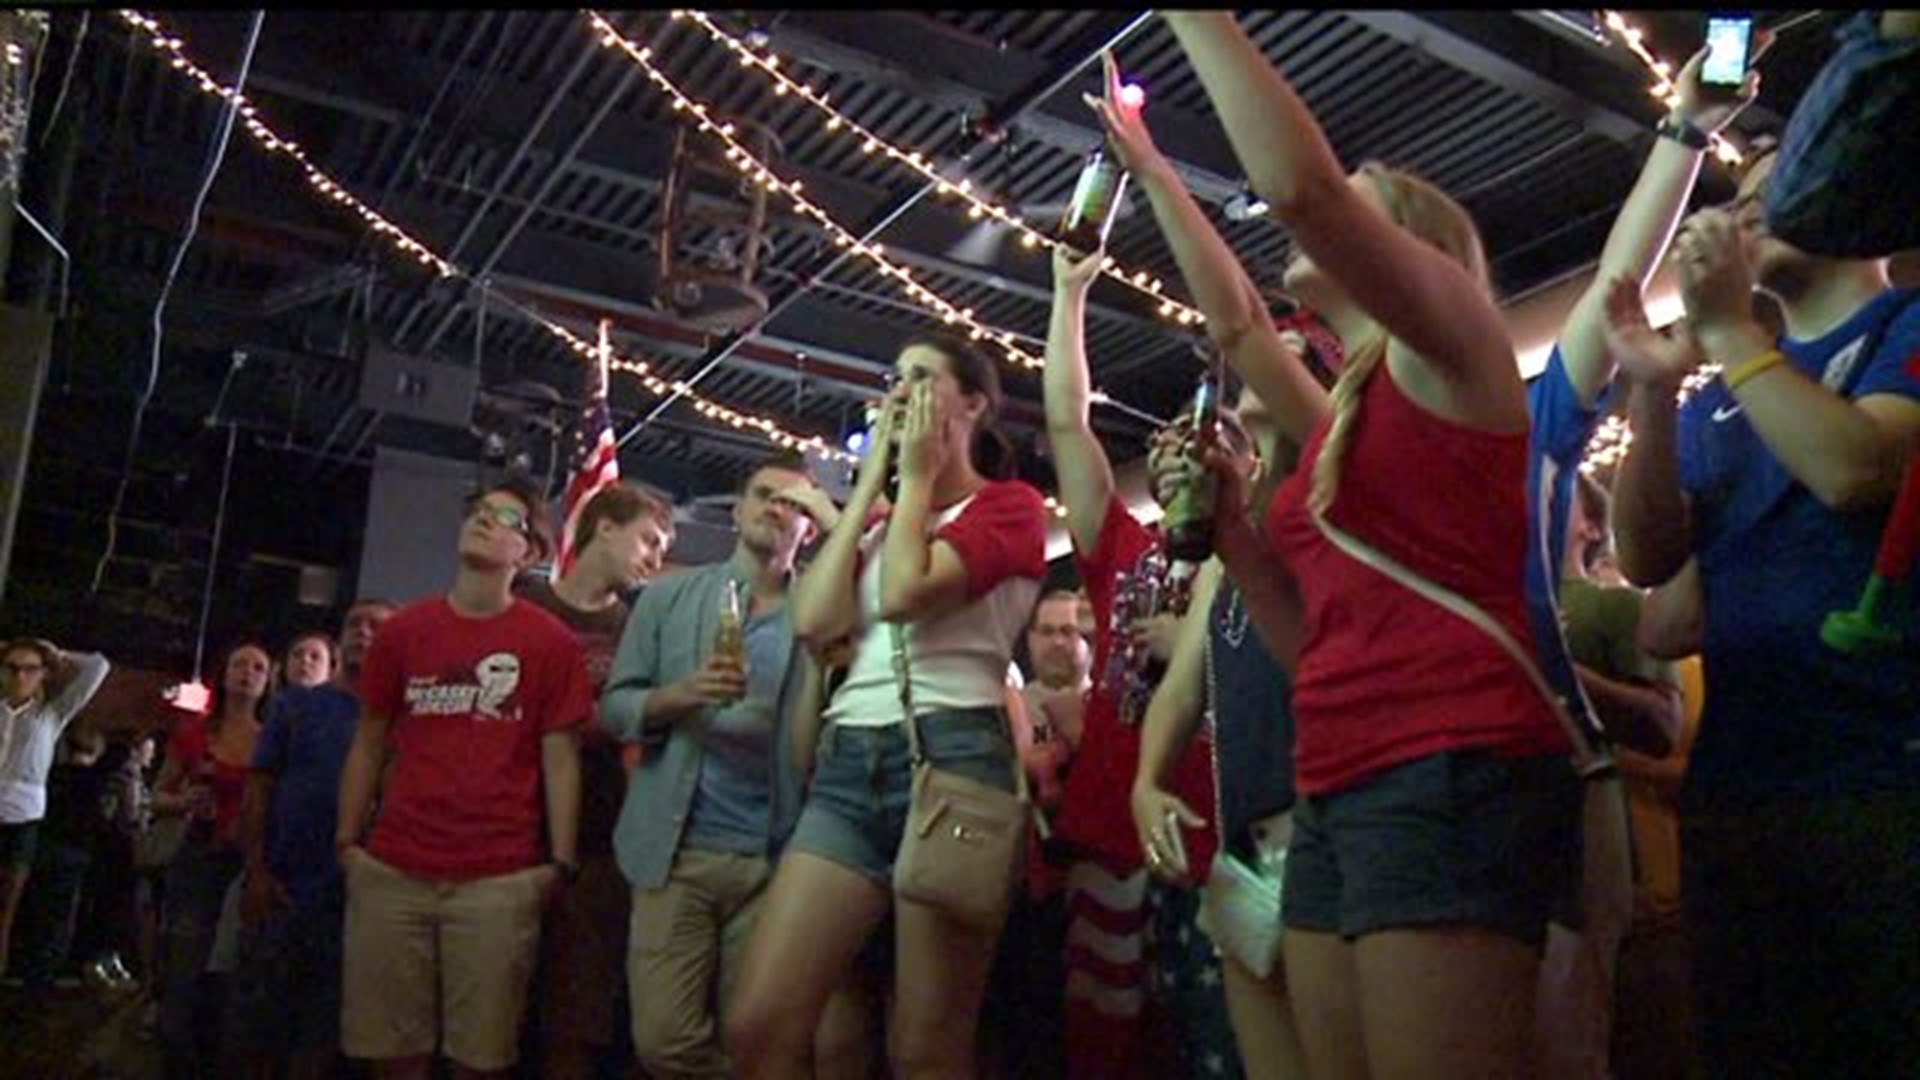 Soccer fans party like it`s 1999 at Tellus360 in Lancaster